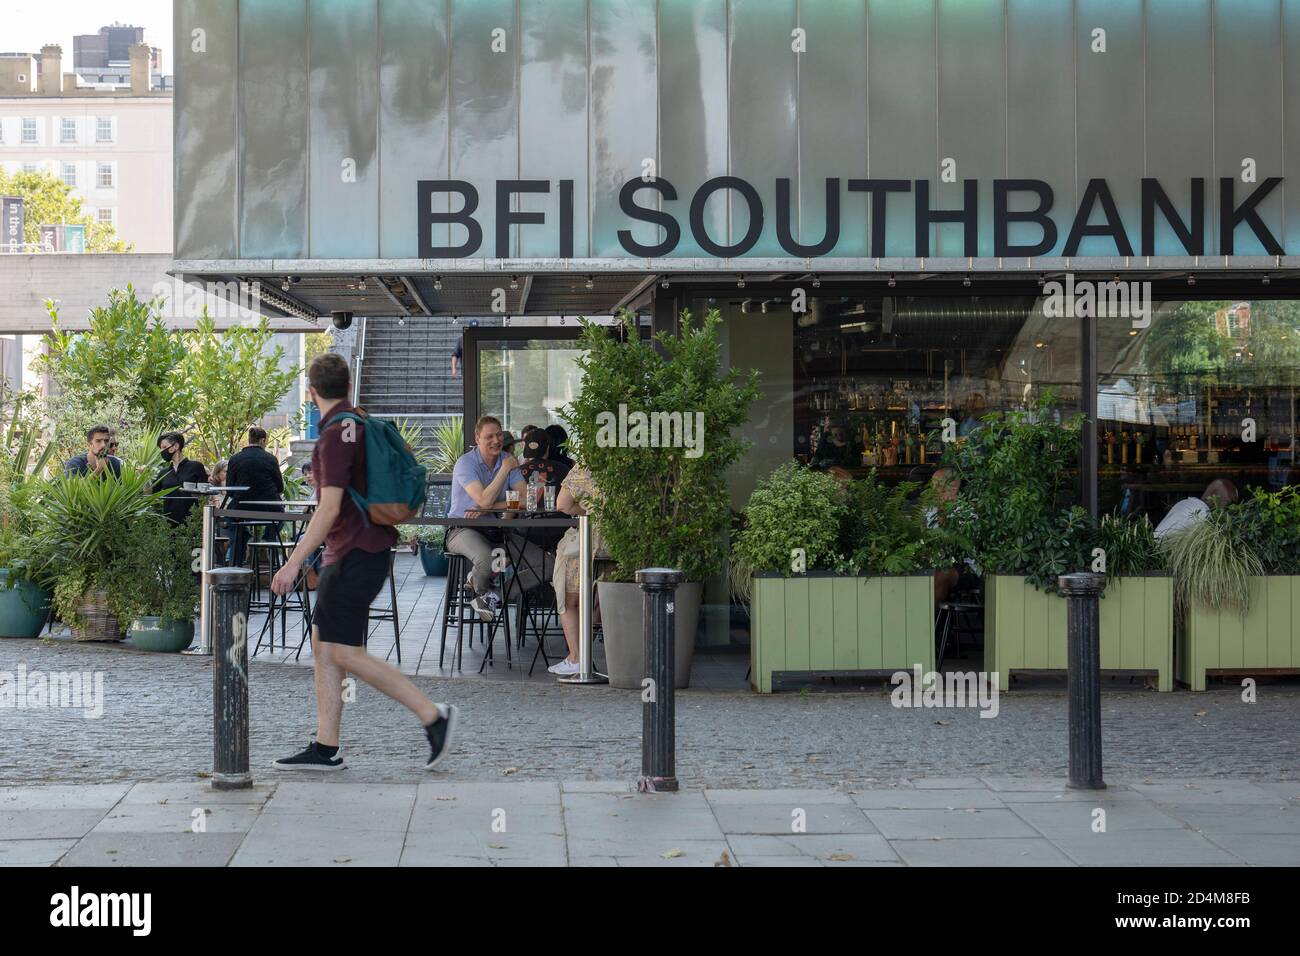 The BFI on the 14th September 2020 on the South Bank in the United Kingdom. Photo by Sam Mellish Stock Photo